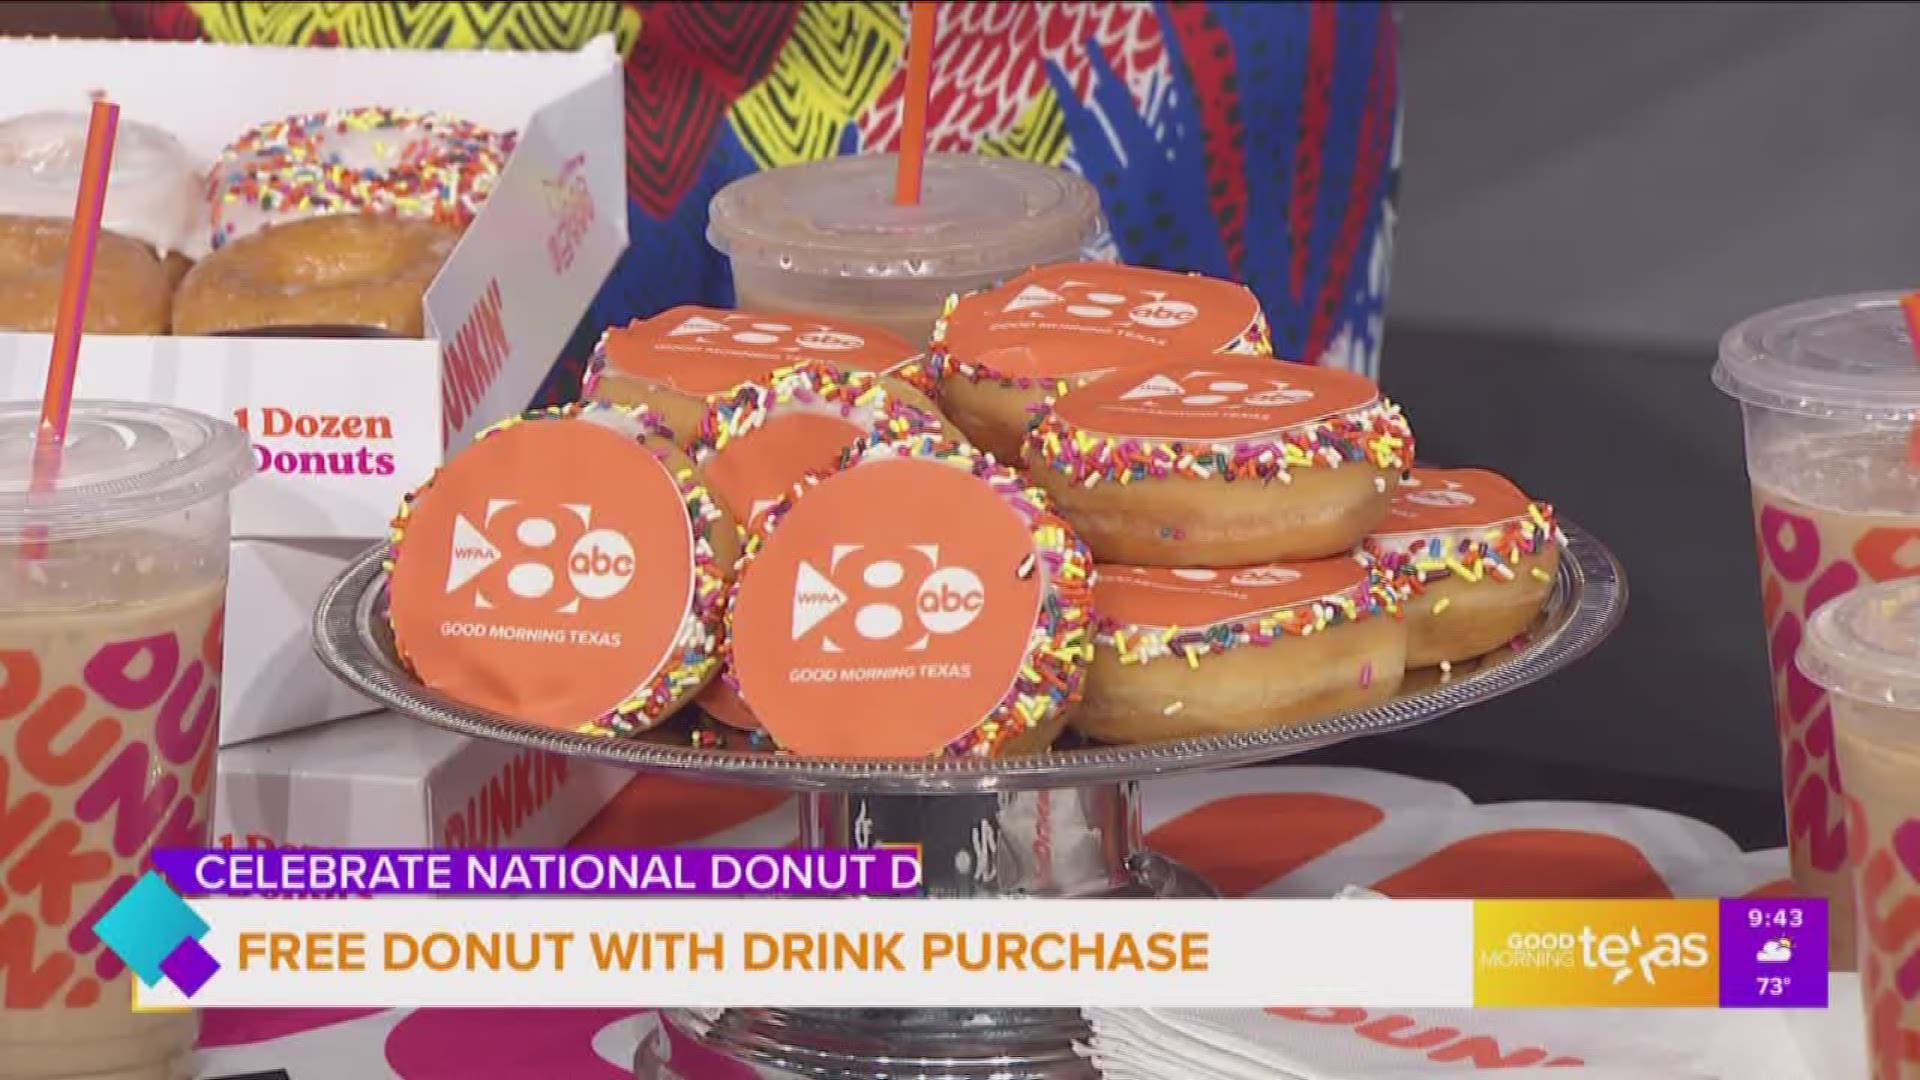 Celebrate National Donut Day with a free donut from Dunkin' Donuts